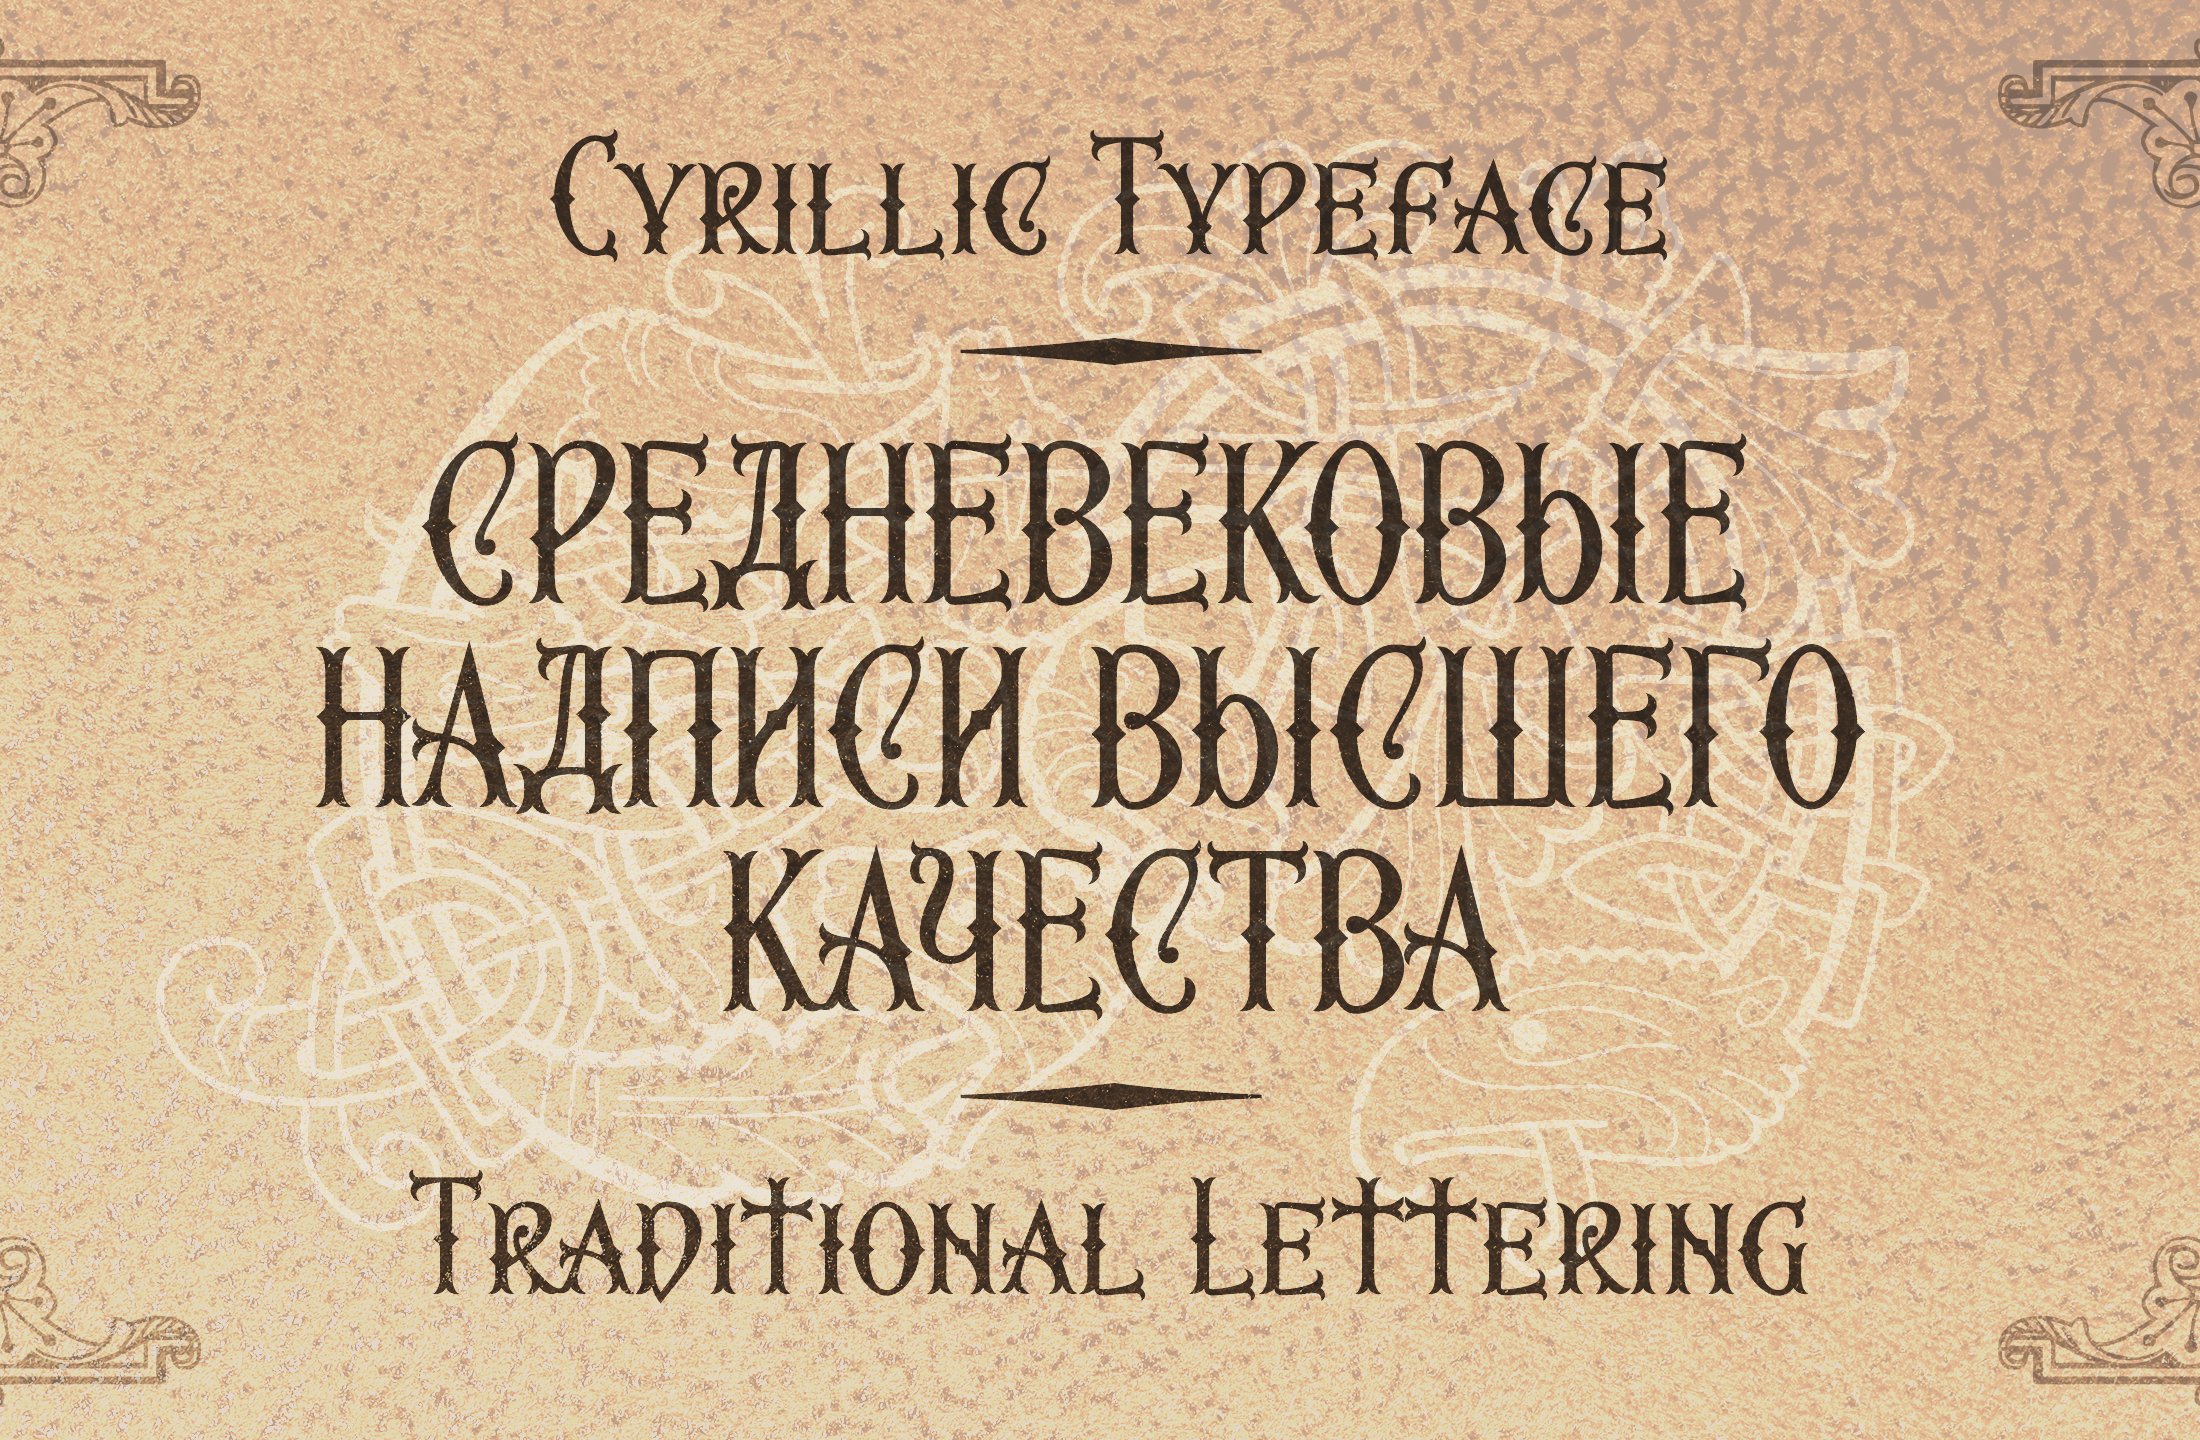 Cyrillic typeface on a beige background.